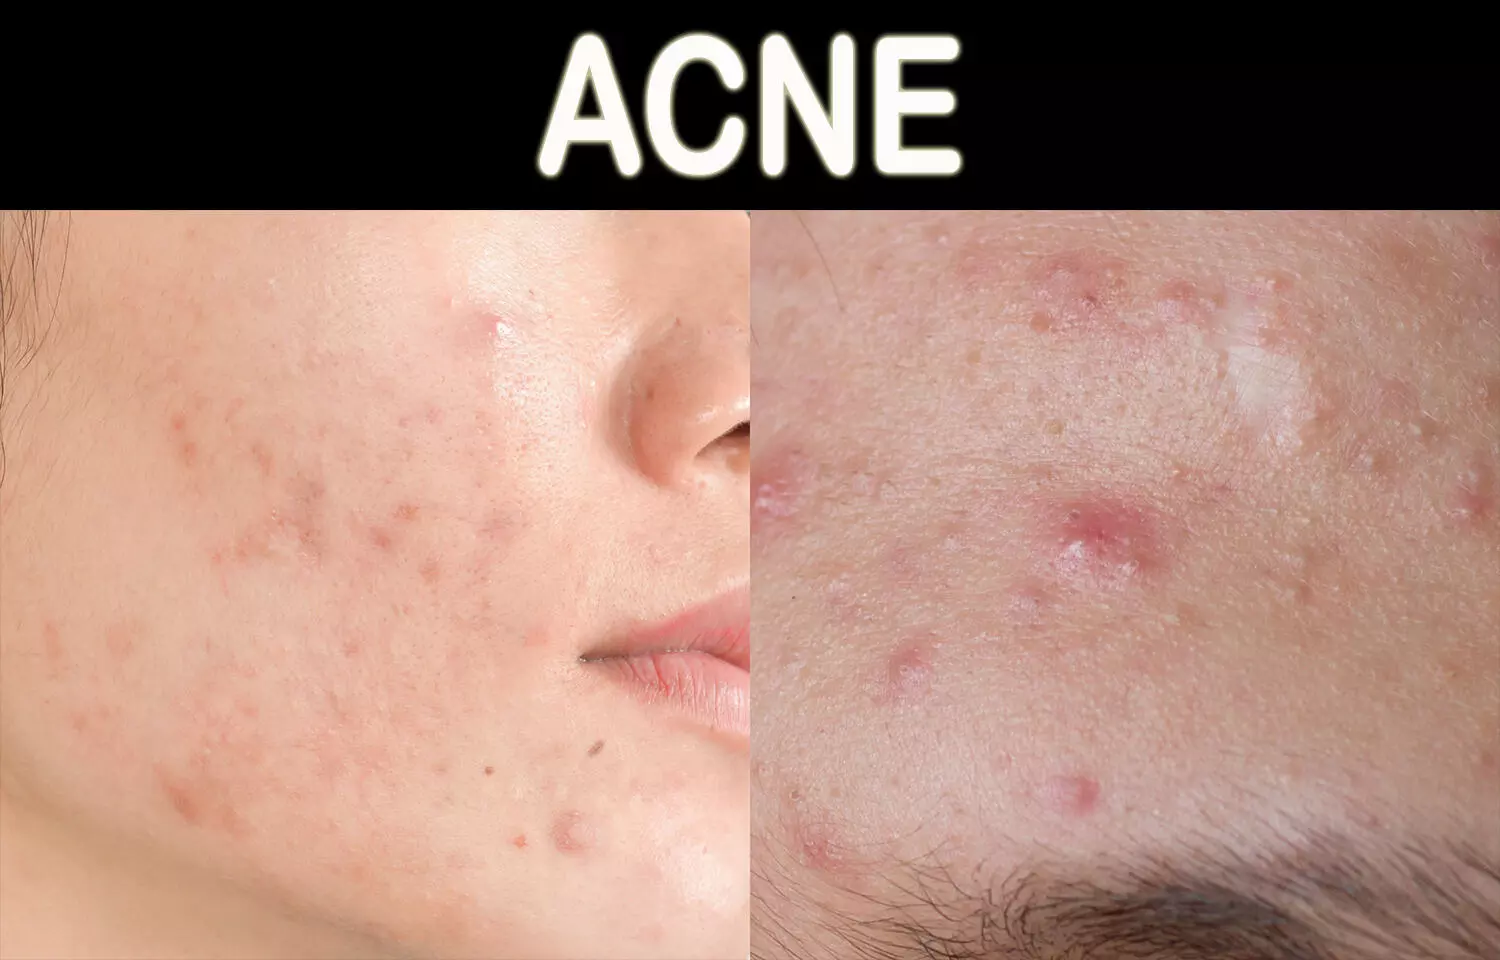 Not all acne bad: scientists reveal strains of C. acnes that promote skin health